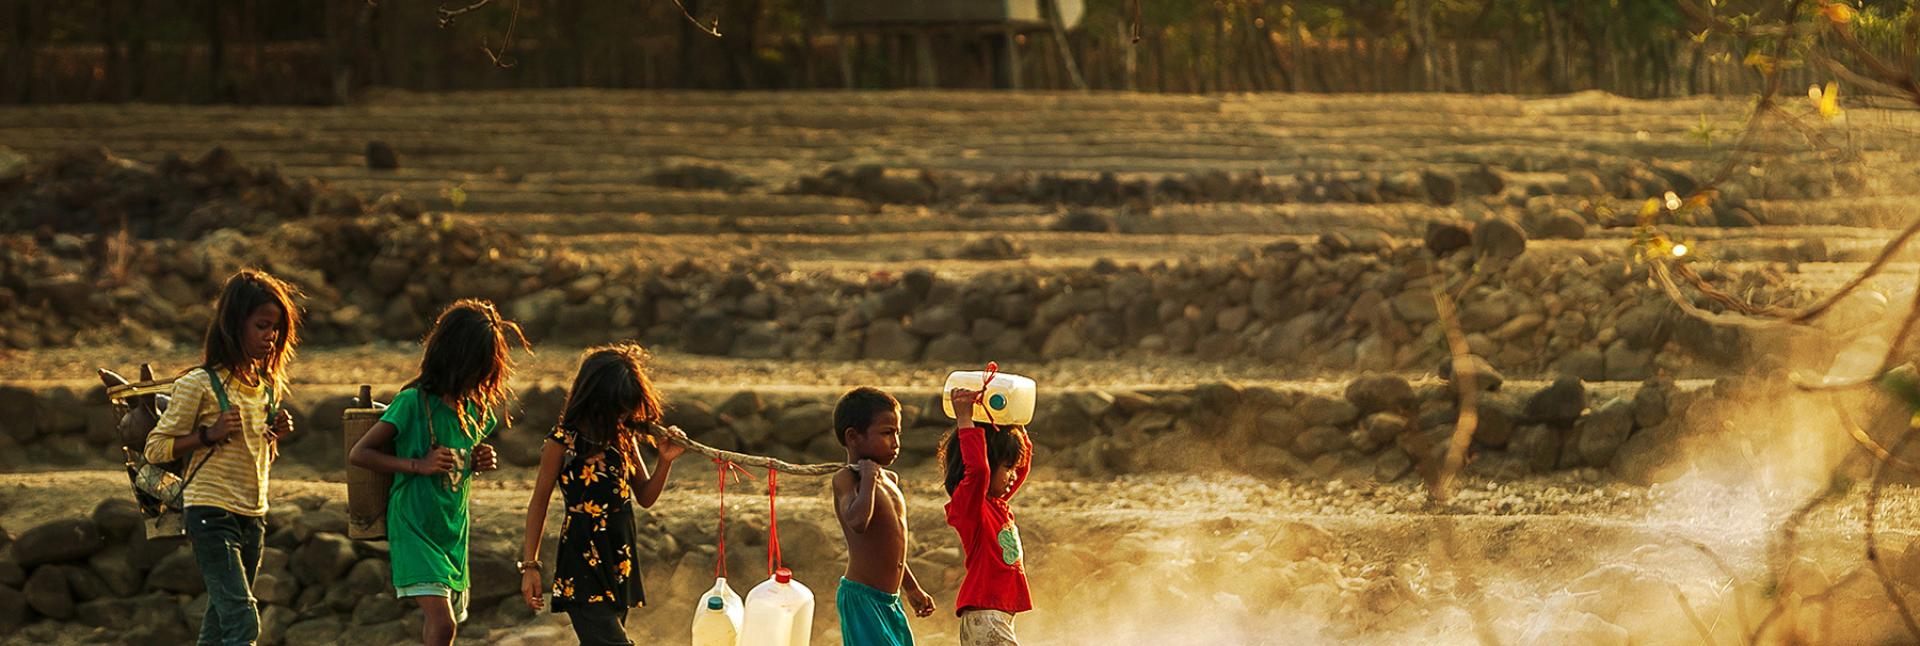 Little children walk in a line as they all hold a large stick holding jugs of water. 